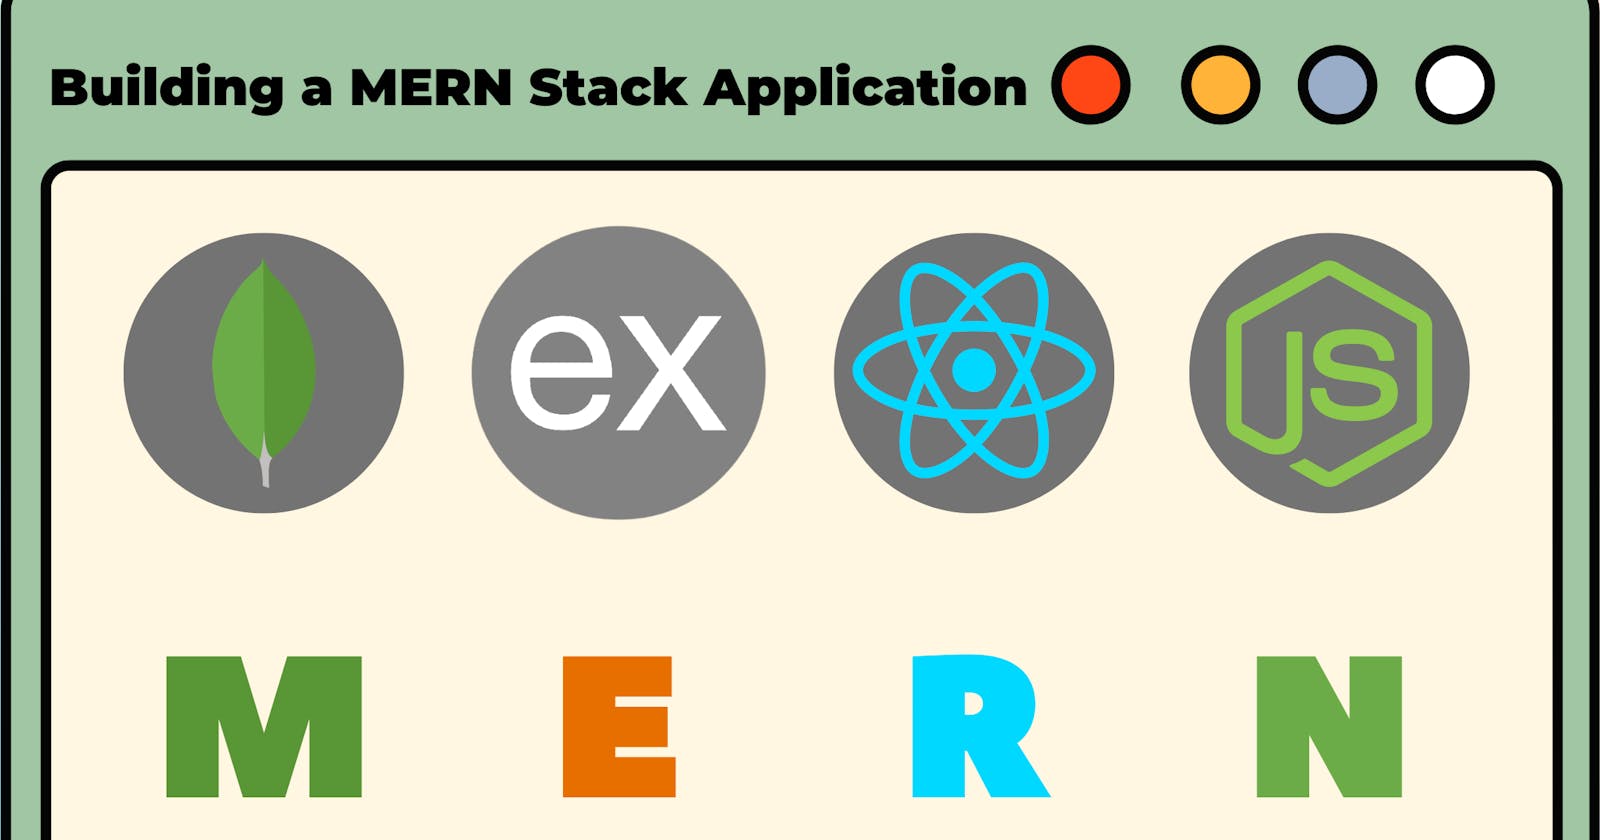 Step-by-Step Guide to Building a MERN Stack Application